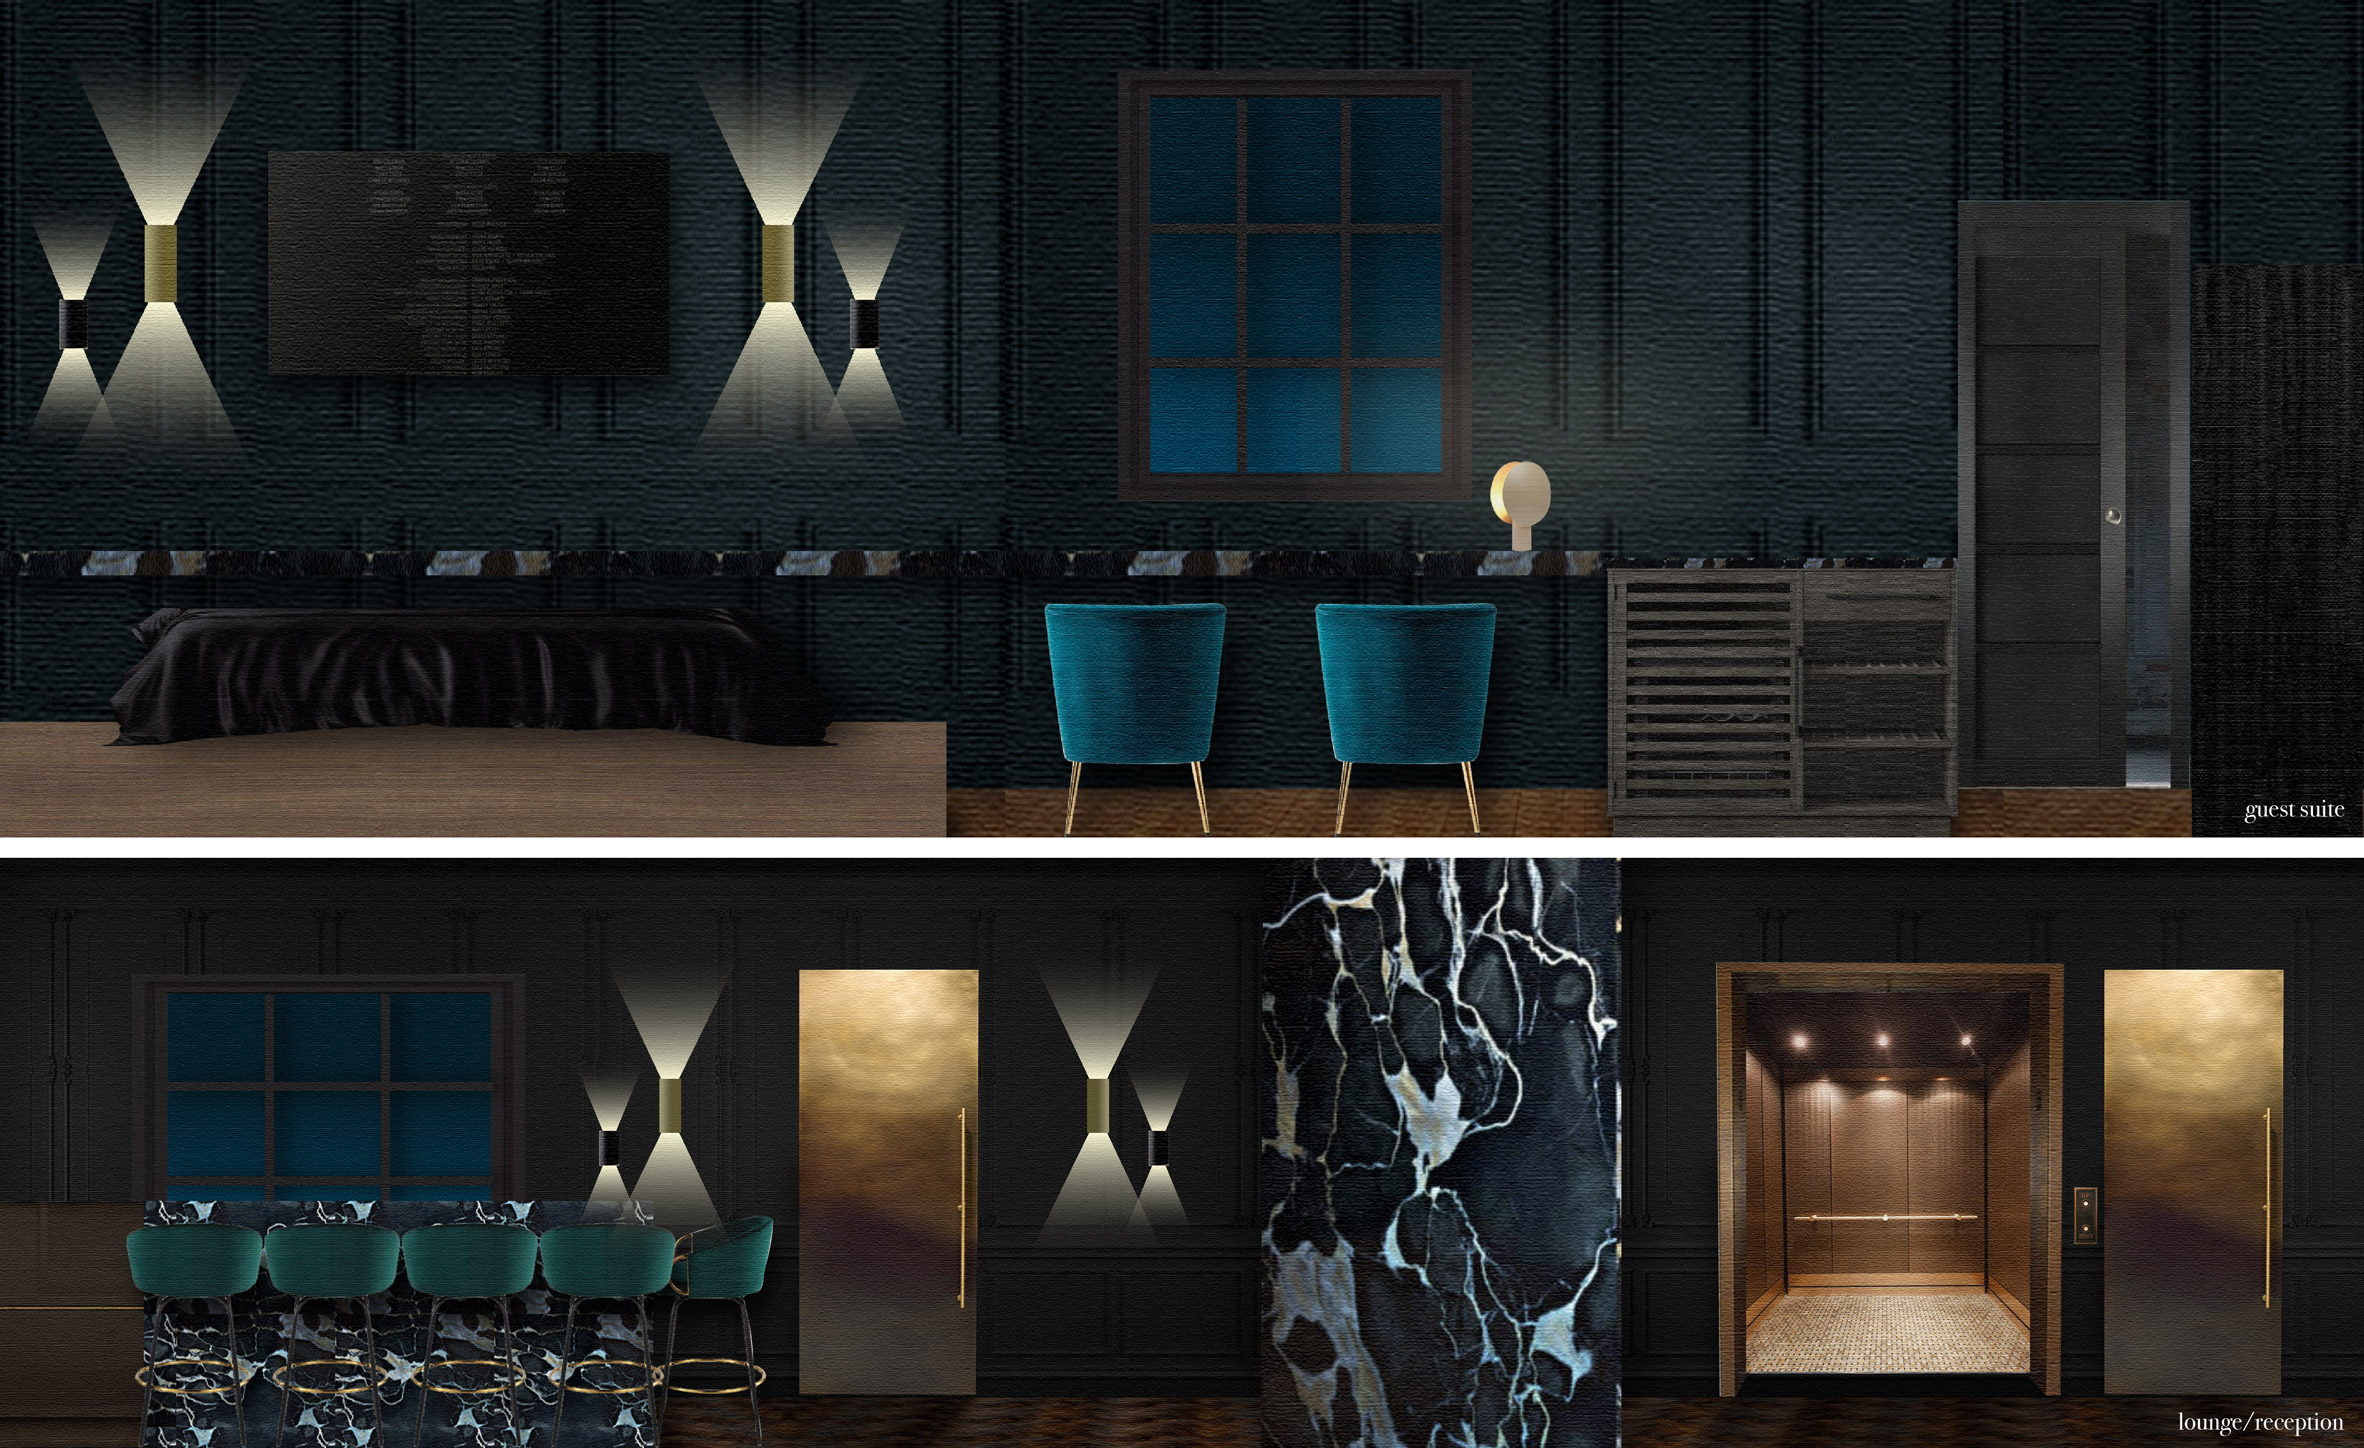 Elevations of various rooms of a hotel interior with midnight blue and gold accents